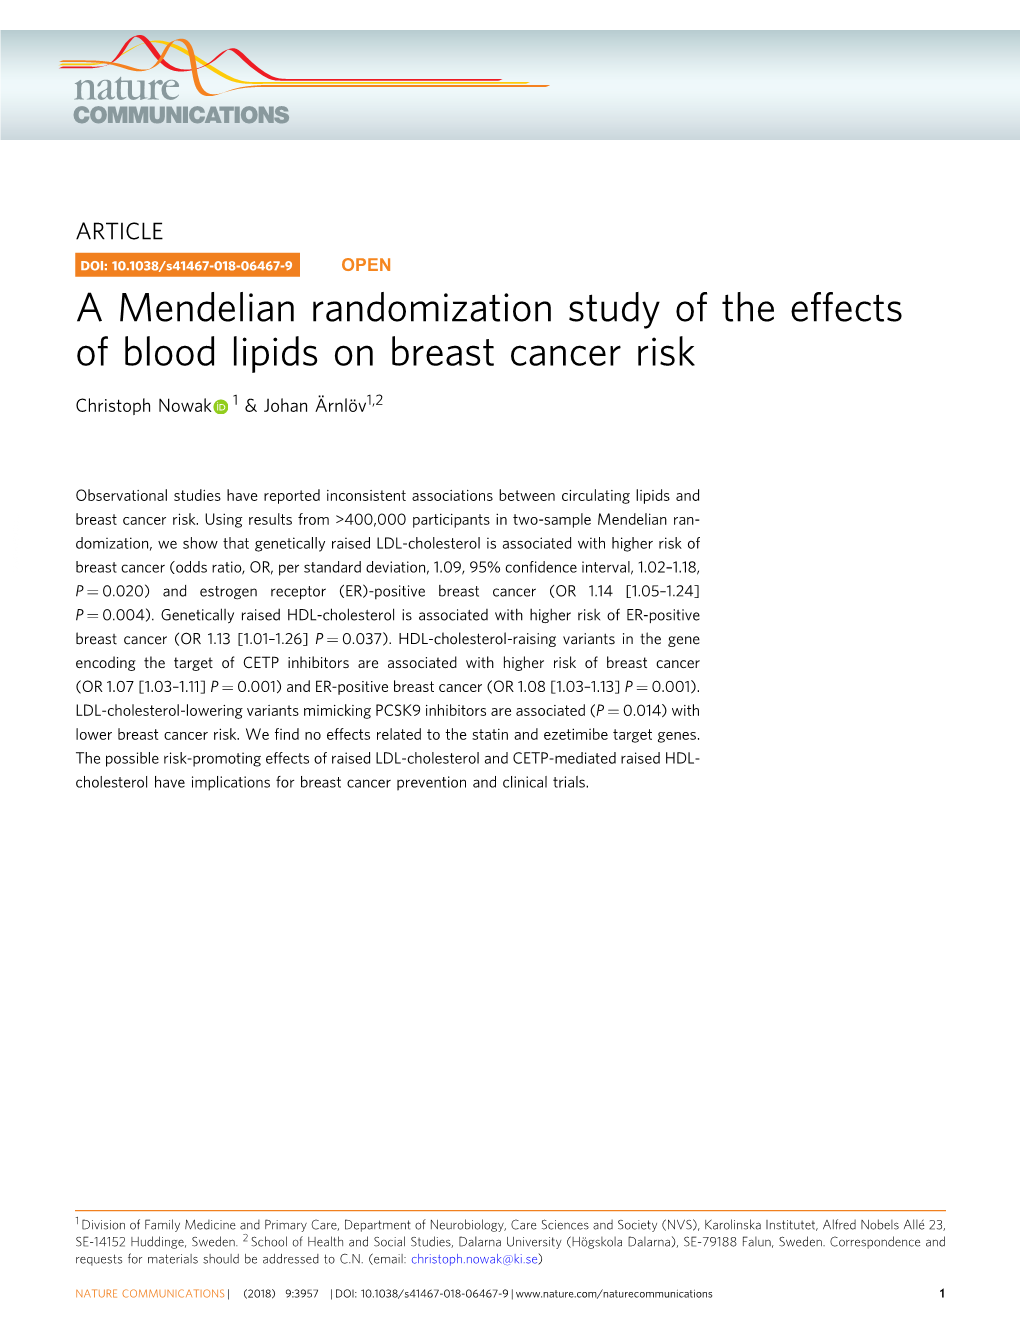 A Mendelian Randomization Study of the Effects of Blood Lipids on Breast Cancer Risk